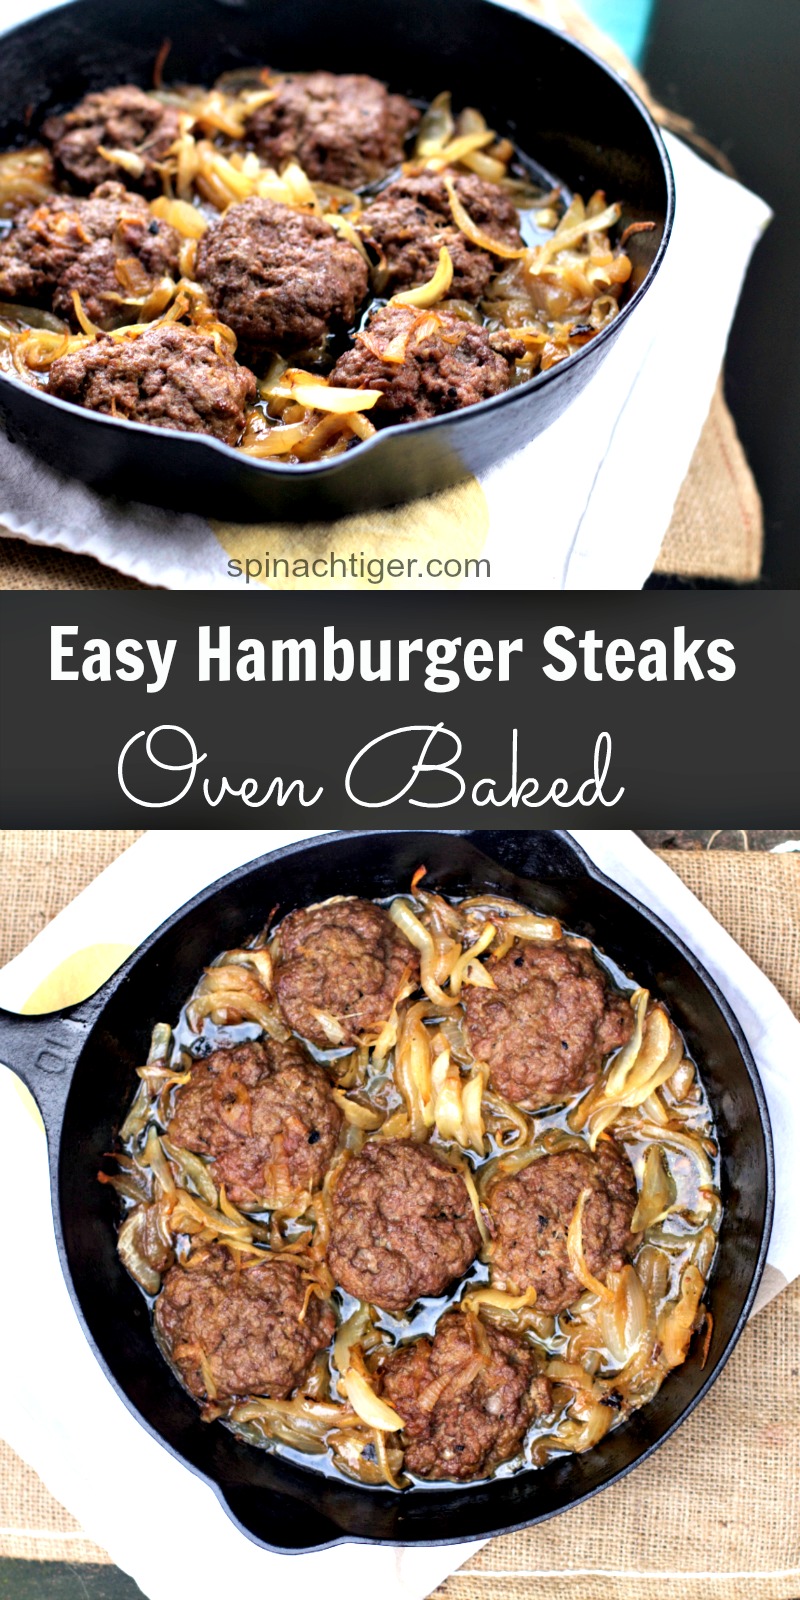 How to Make Easy Hamburger Steaks Recipes from Spinach Tiger